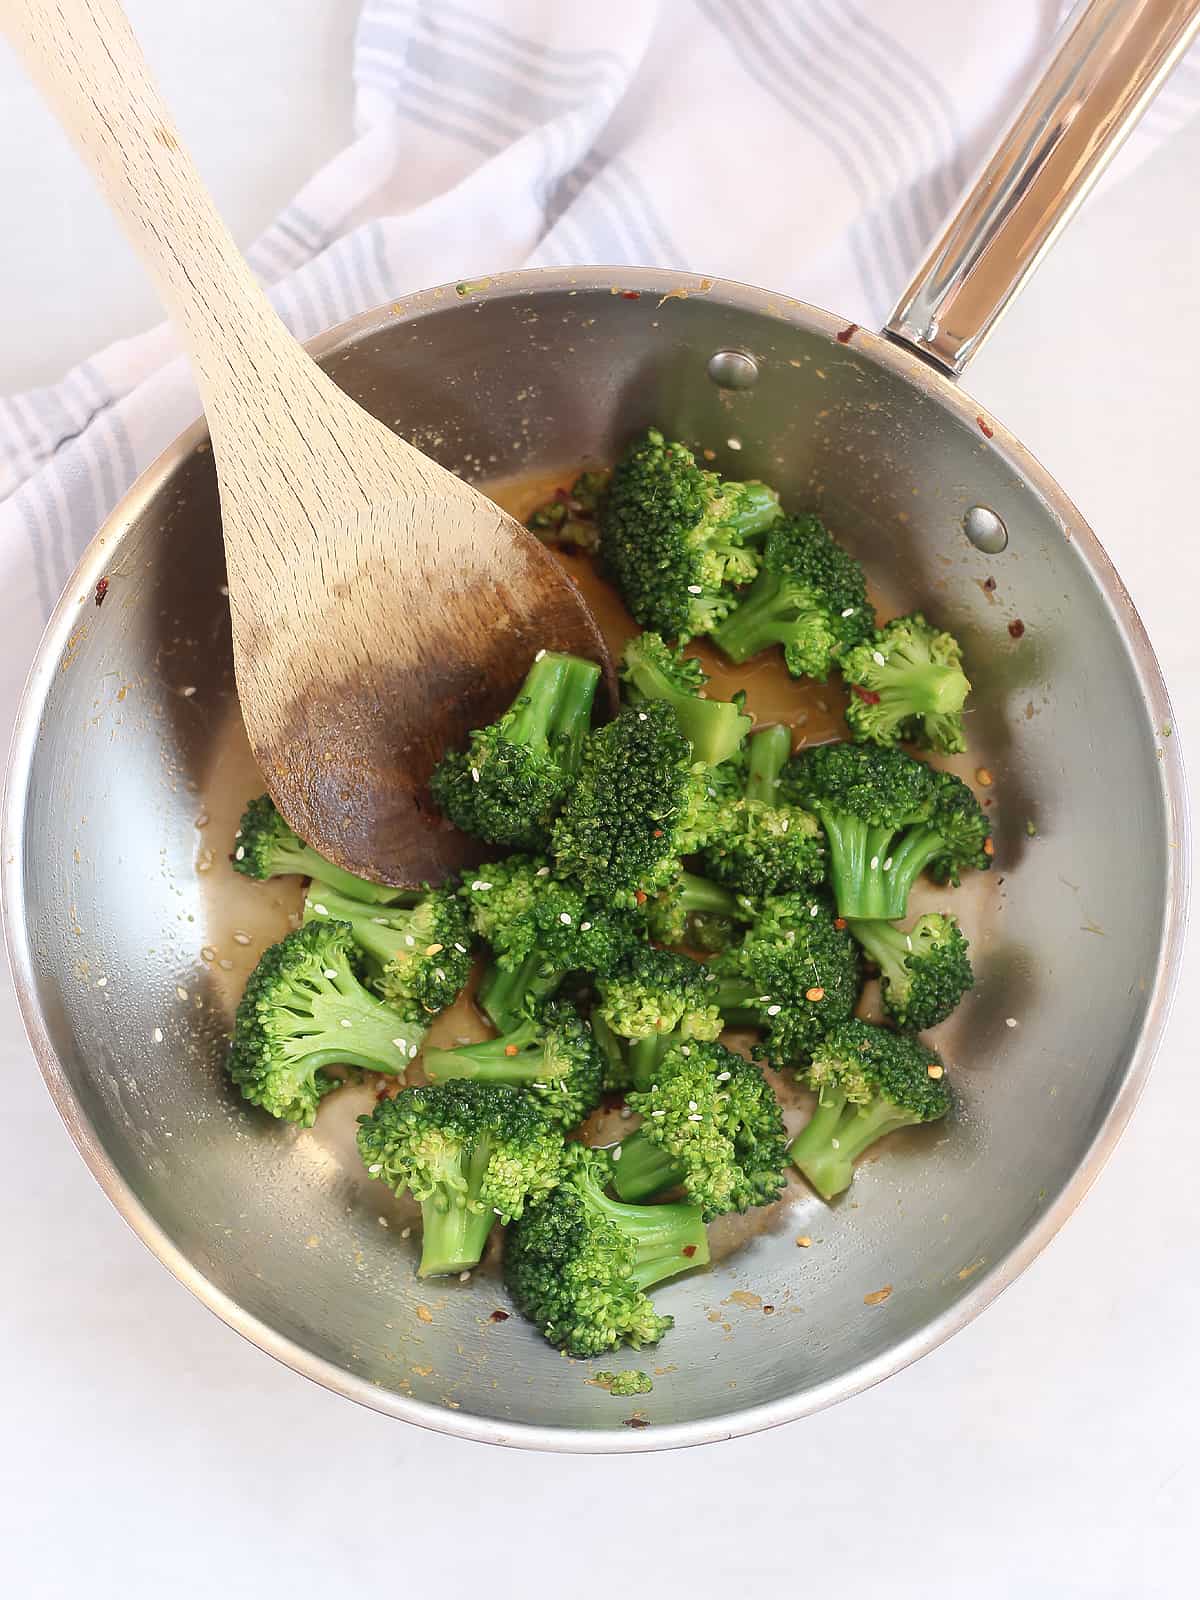 Broccoli florets in a skillet with soy sauce, being stirred with a wooden spoon.